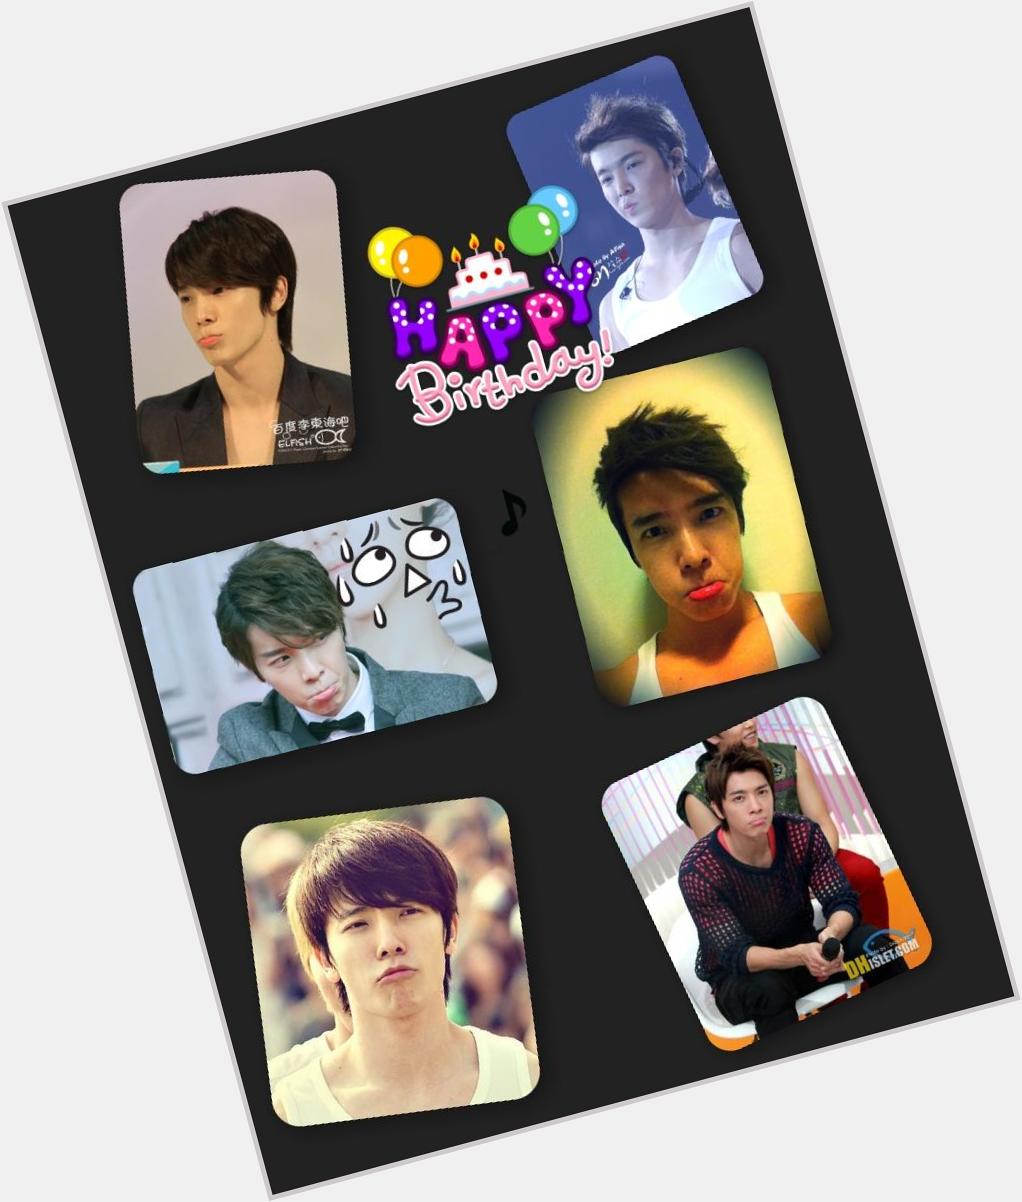 Happy Birthday my one and only Lee Donghae, my sweet baby, my pabo donghaek, ELF always be with you 